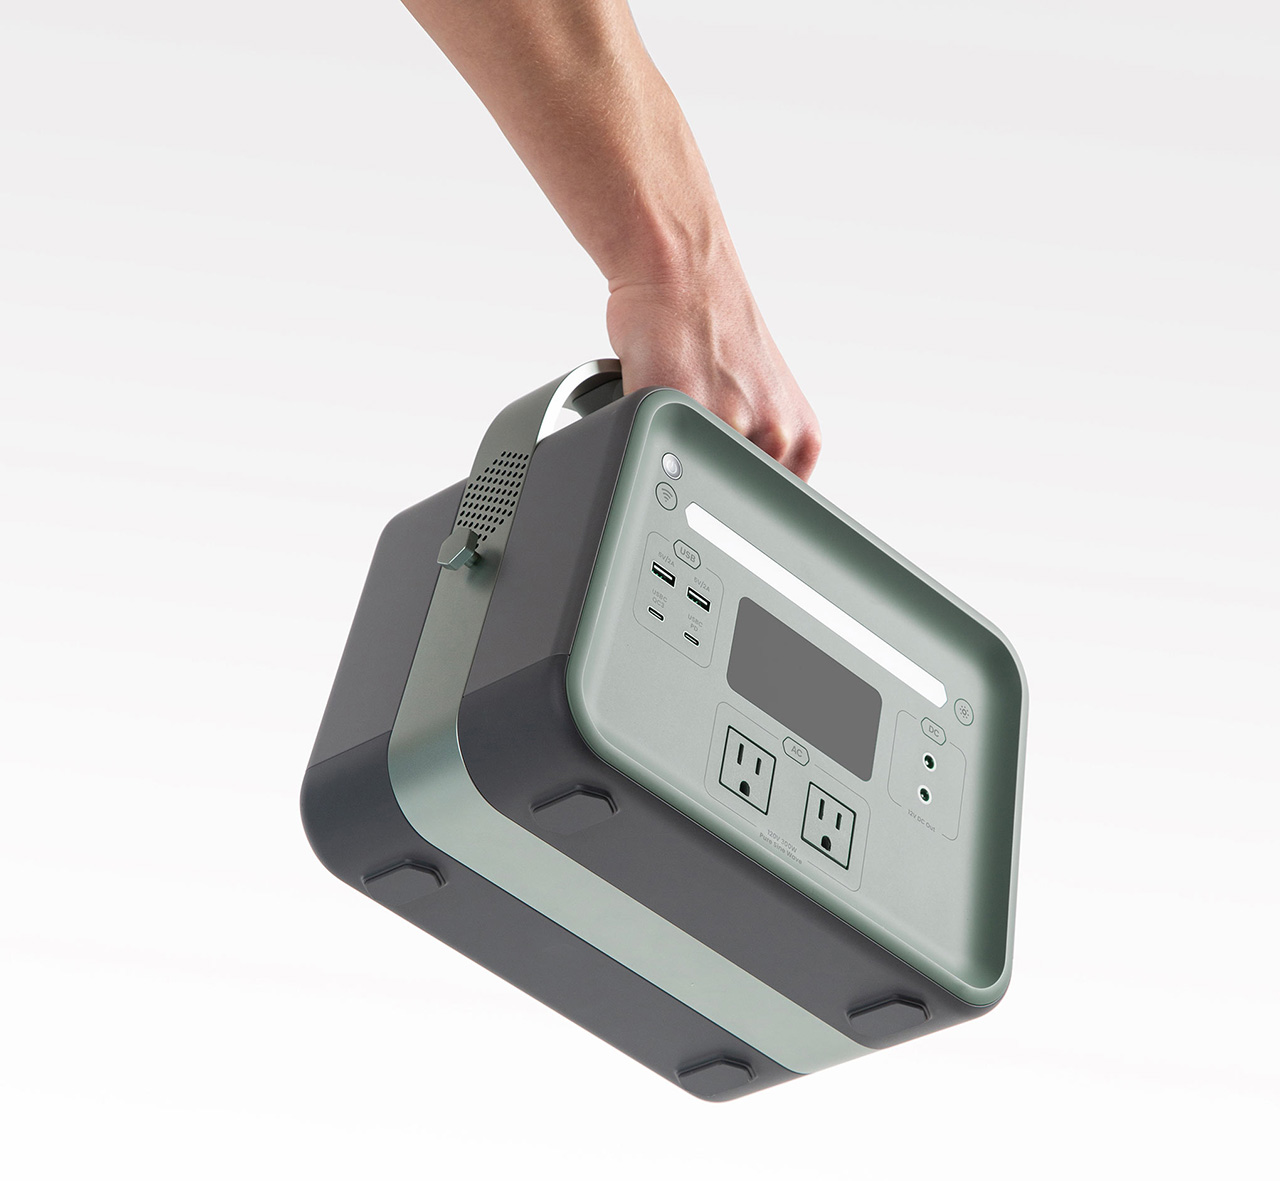 Yves Behar Helps Yoshino Get a Grip on the World’s 1st Solid-State Portable Power Station